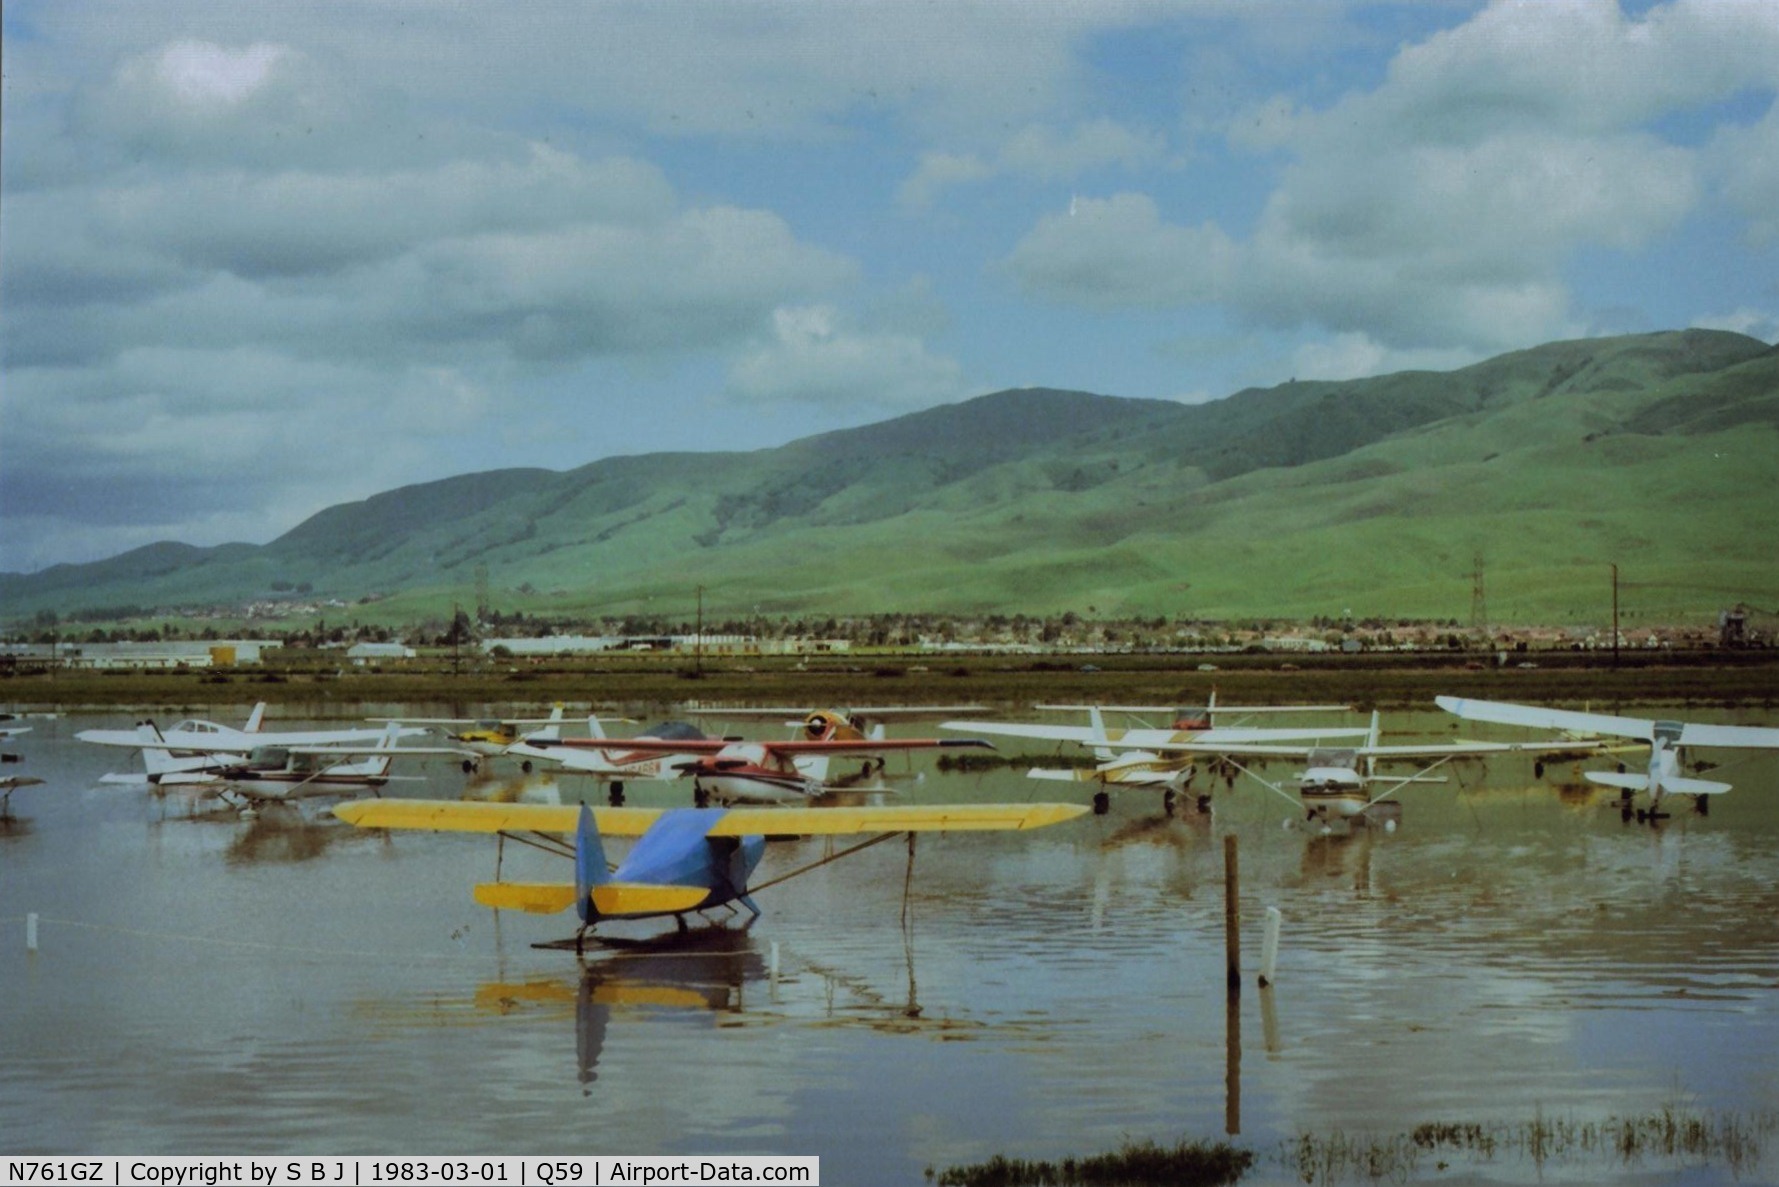 N761GZ, Cessna A152 Aerobat C/N A1520953, 1GZ (Cessna 152) seen on the left side of the yellow (Chief) wing with its feet wet during an early 80s Fremont flood.Sadly now the entire plane is under water due to a tragic accident on 6-19-94.